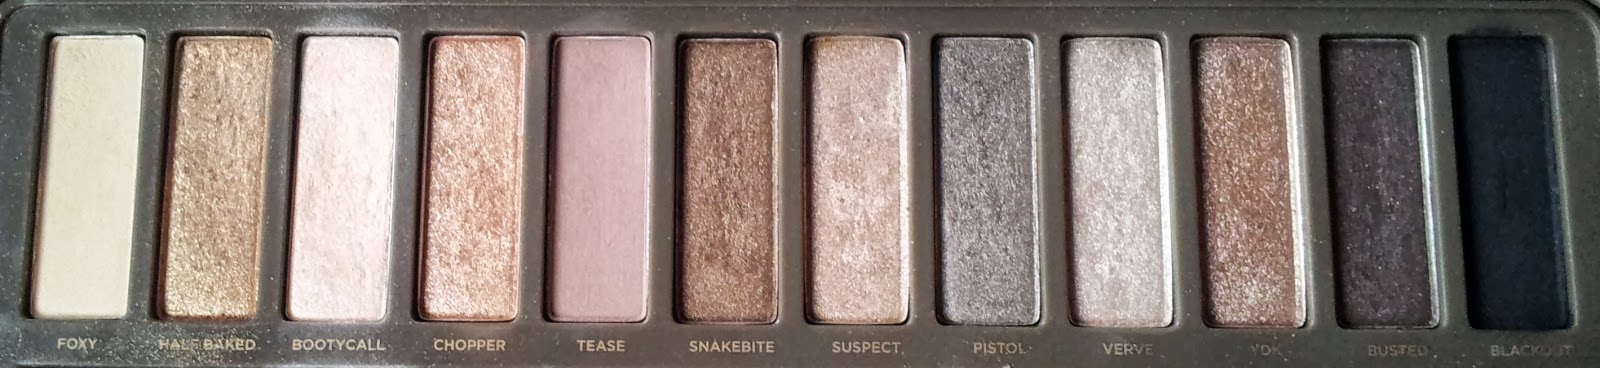 Urban Decay Naked 2 Palette Review +& Swatches.